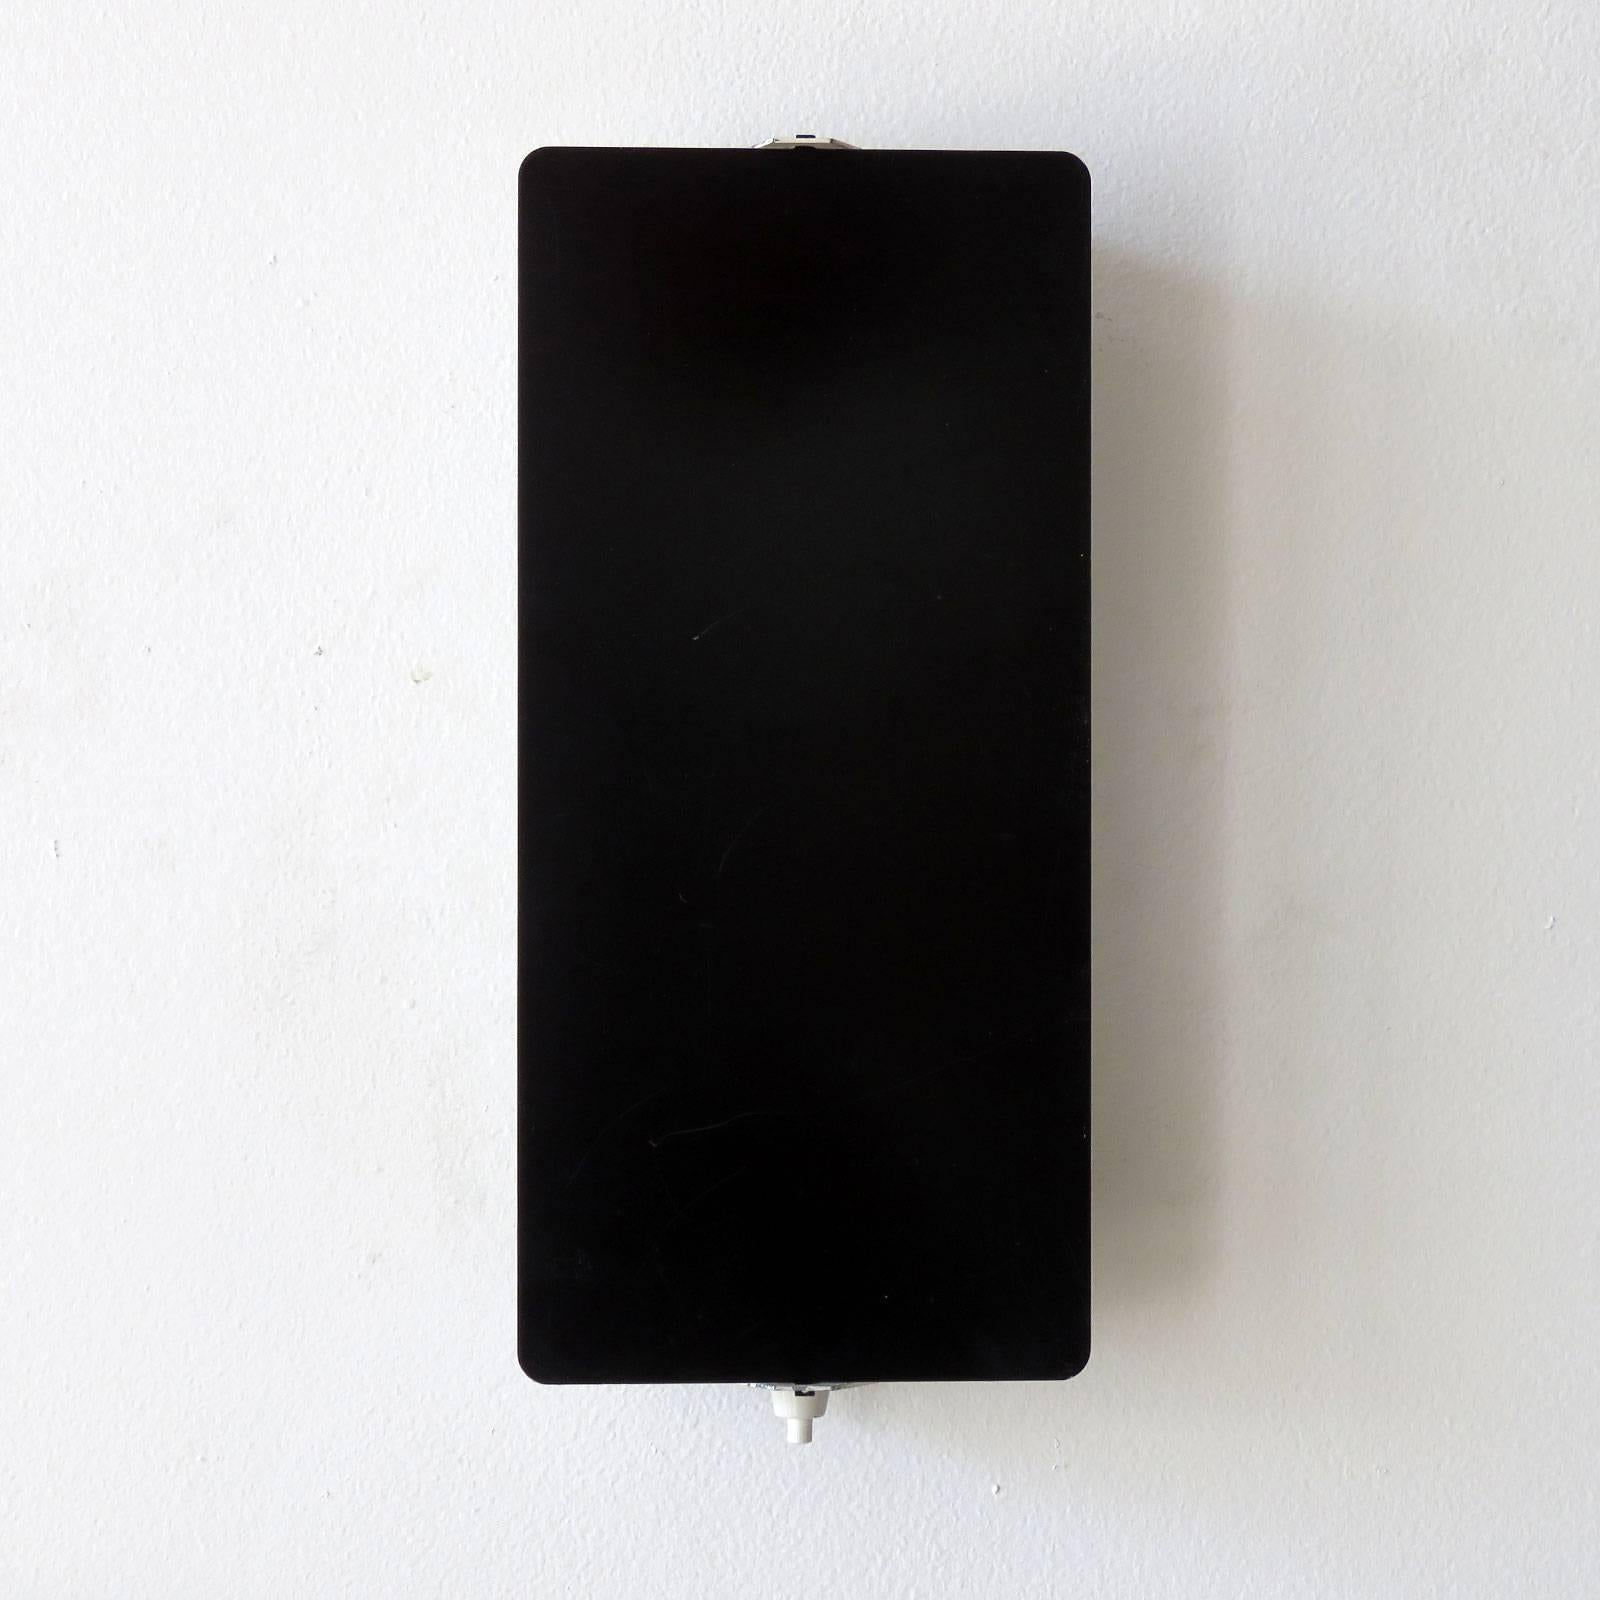 Rare large scale, enameled wall lights by Charlotte Perriand with adjustable reflectors in black enameled finish with two sockets each, optional horizontal or vertical mount, manufactured and distributed by Steph Simon, Paris, marked. Priced